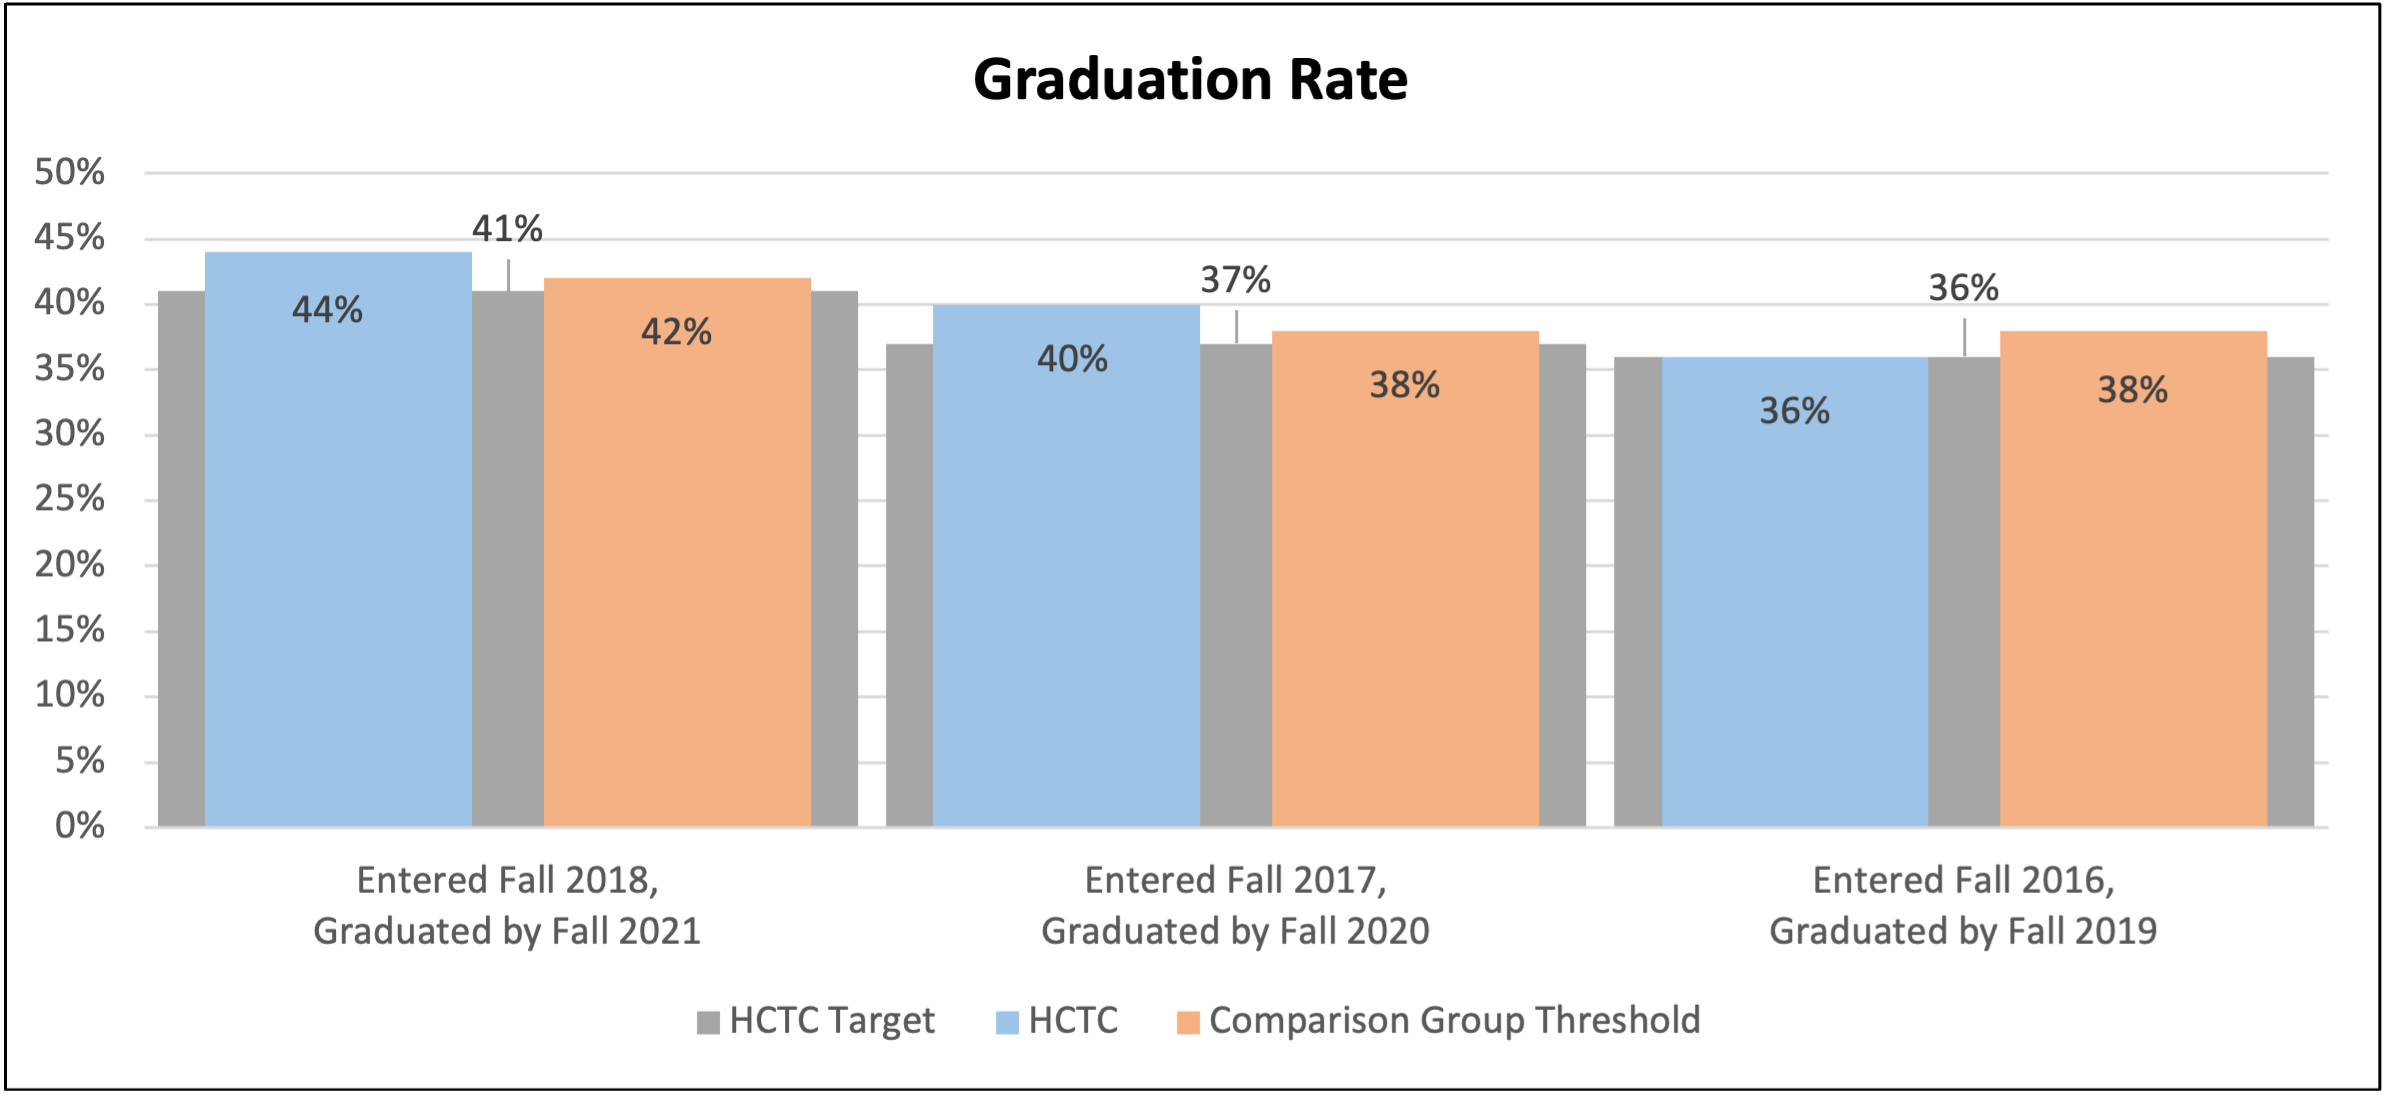 Graduation Rate: Measured by the percentage of students from the cohort who completed a degree or certificate within three years.  That cohort includes full-time, first-time degree-certificate-seeking students.